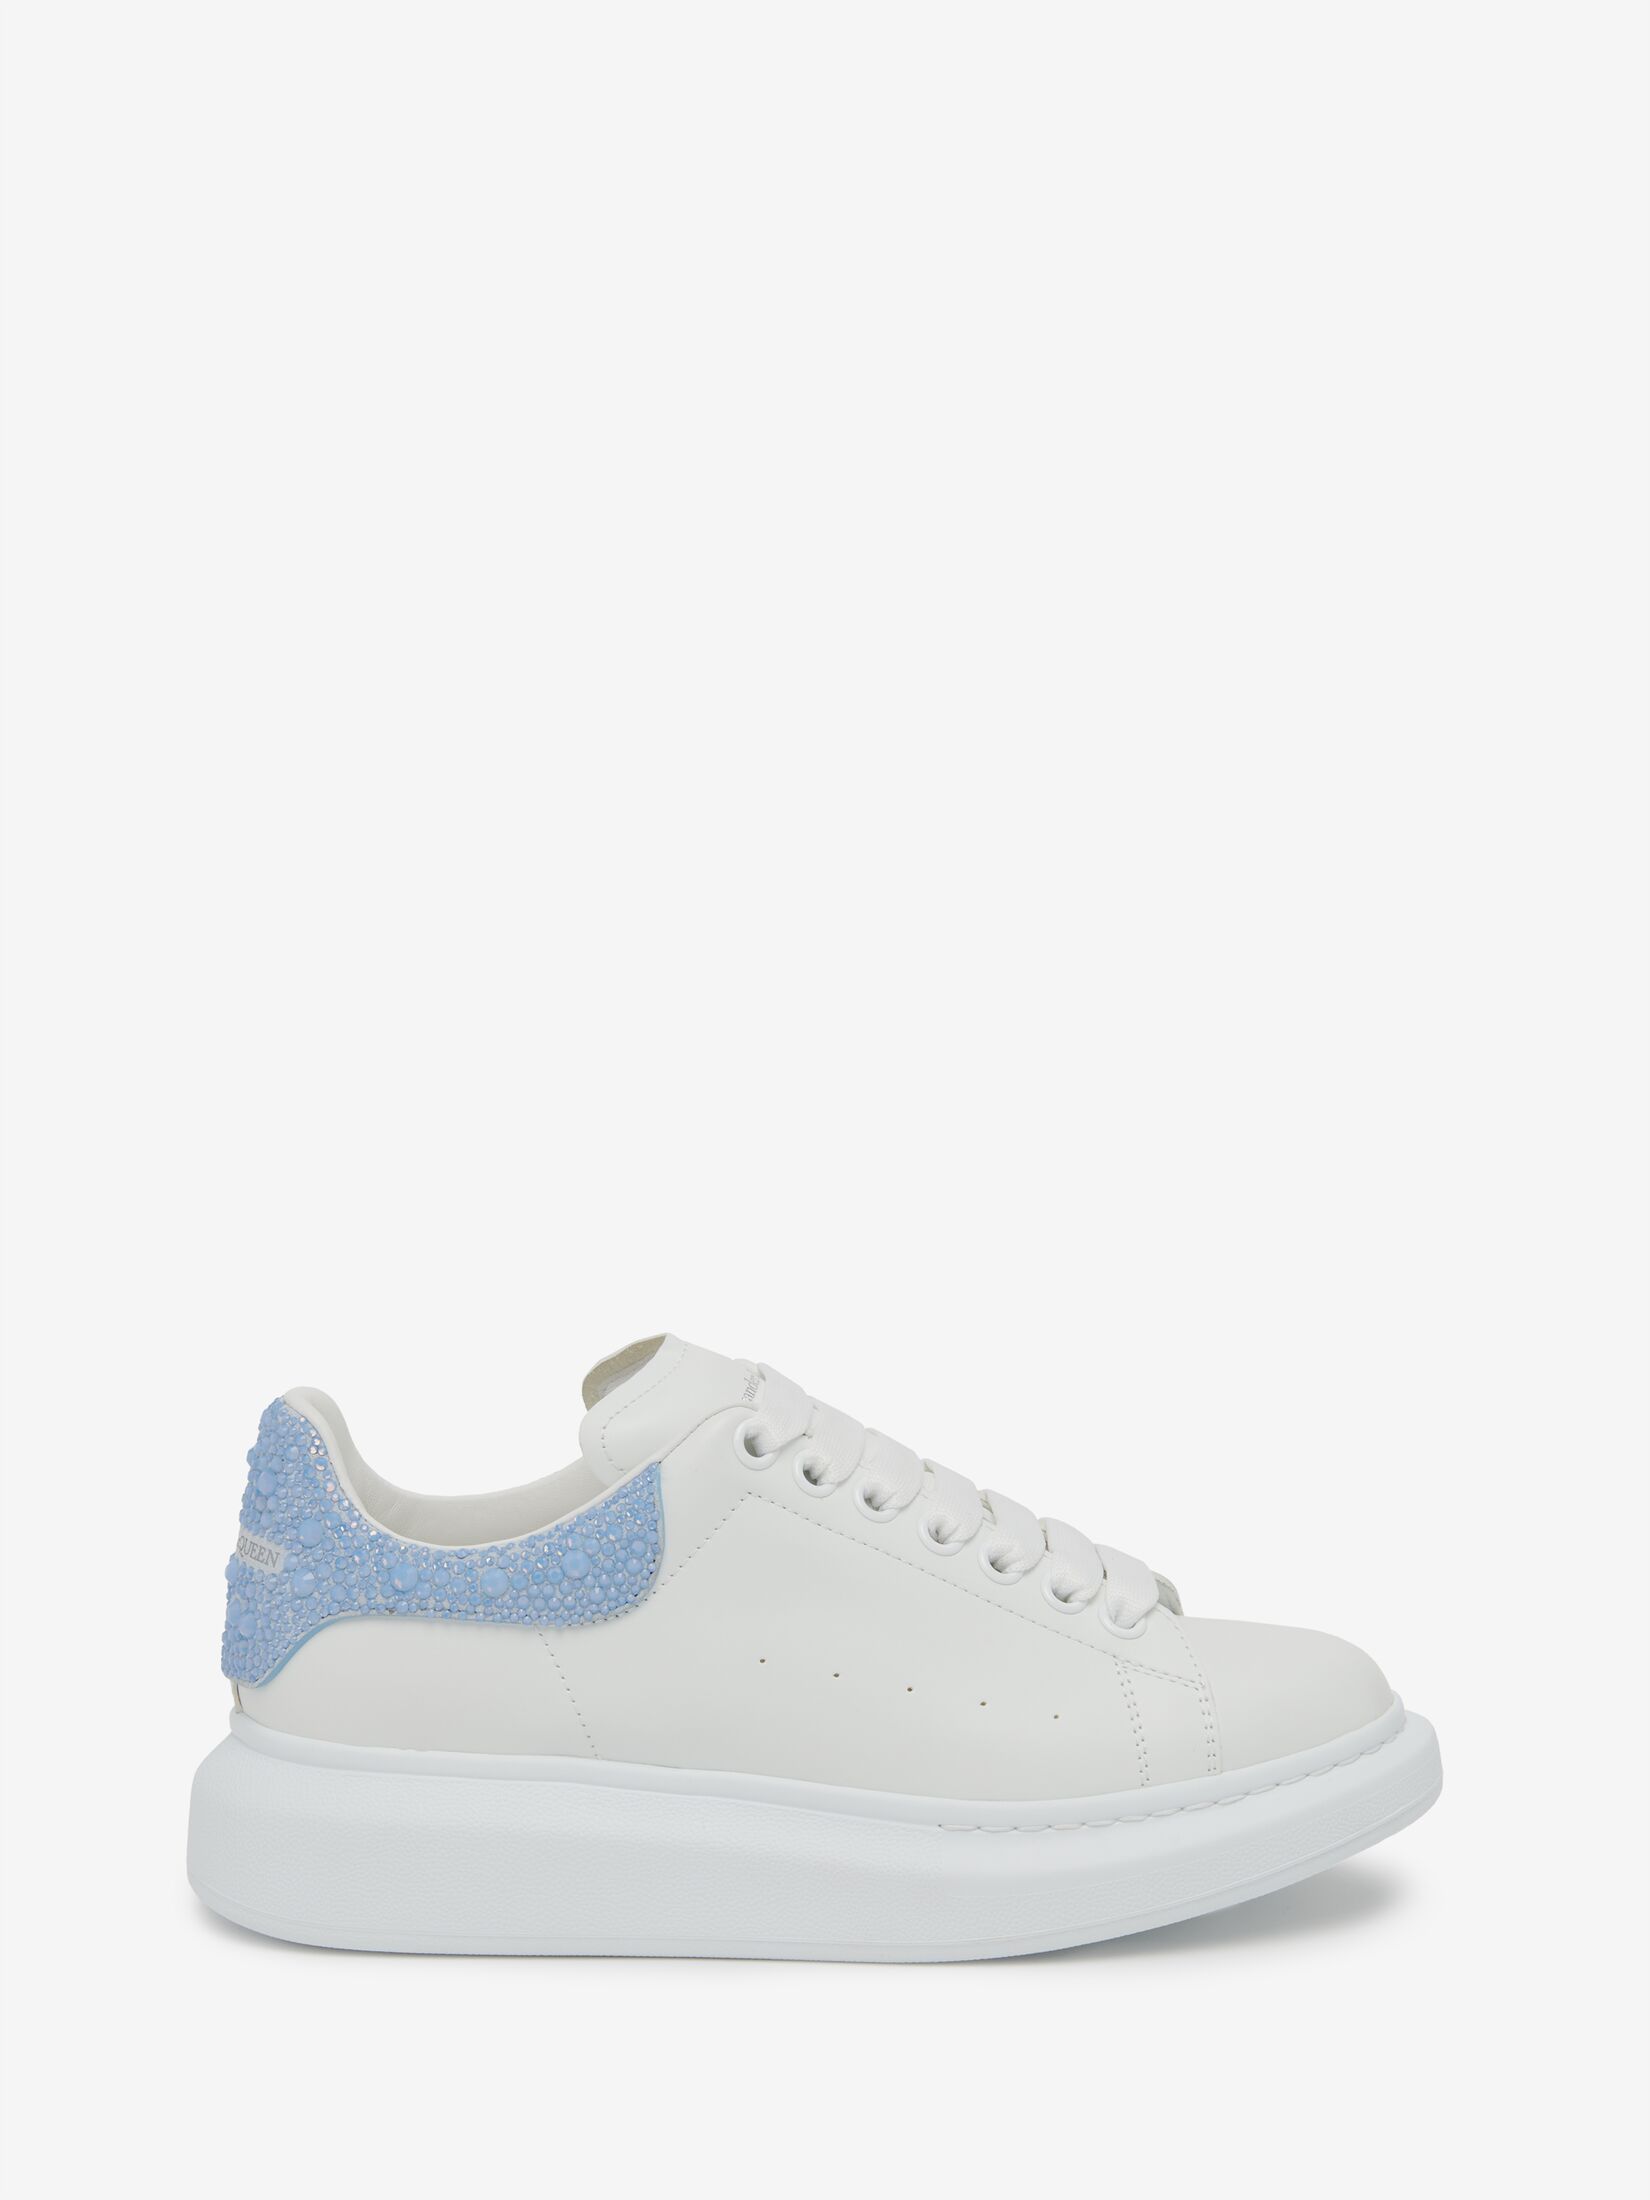 Alexander McQueen Ssense Exclusive Off-white Holographic Oversized Sneakers  | Lyst